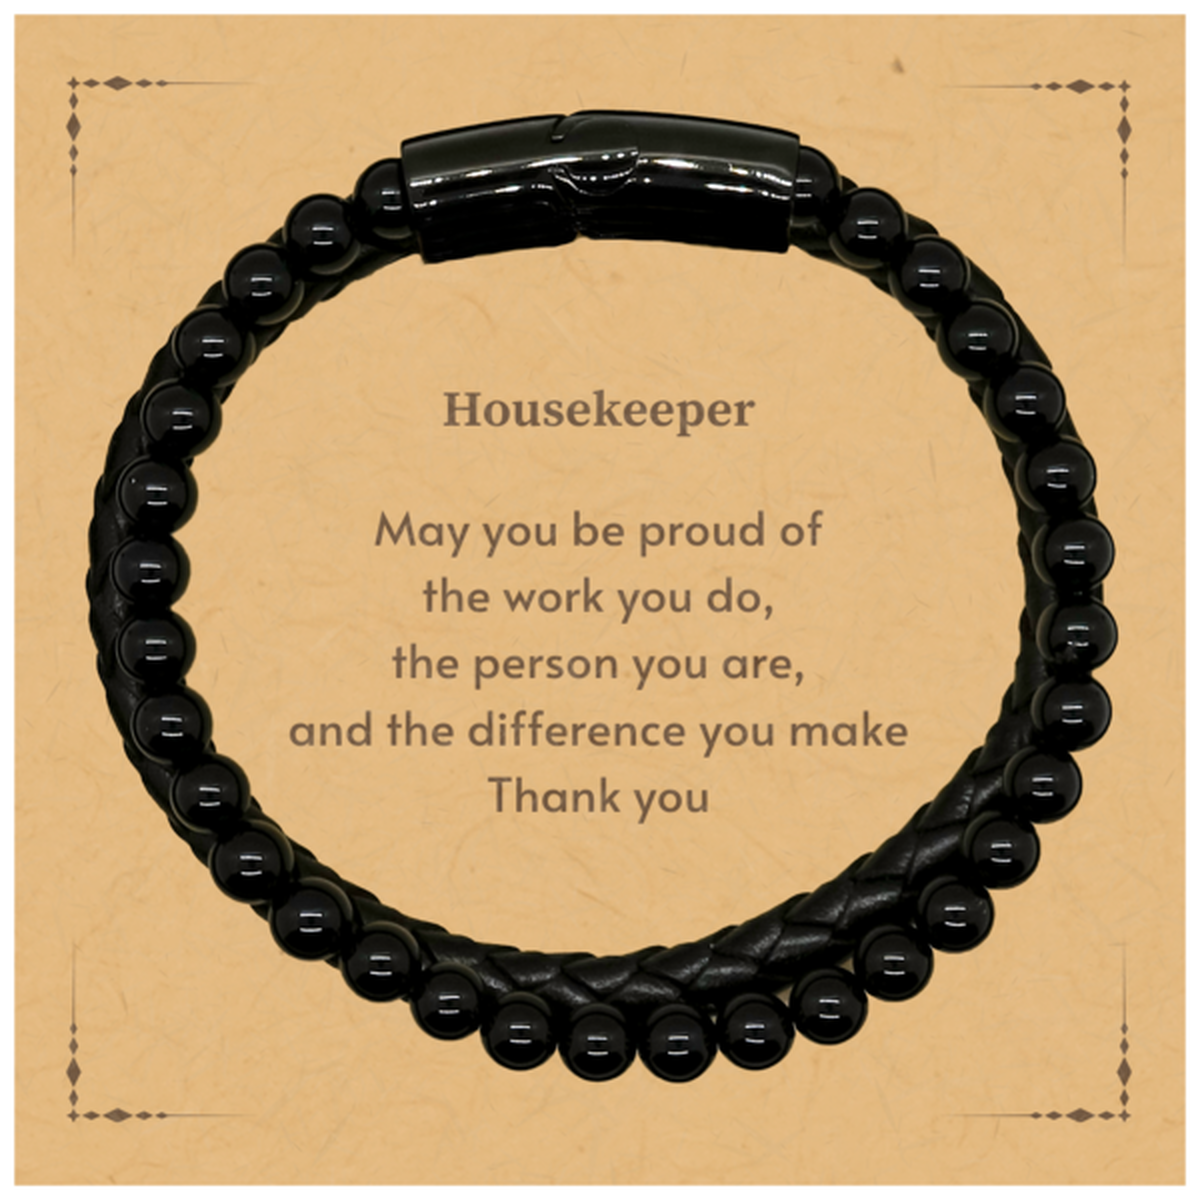 Heartwarming Stone Leather Bracelets Retirement Coworkers Gifts for Housekeeper, Housekeeper May You be proud of the work you do, the person you are Gifts for Boss Men Women Friends